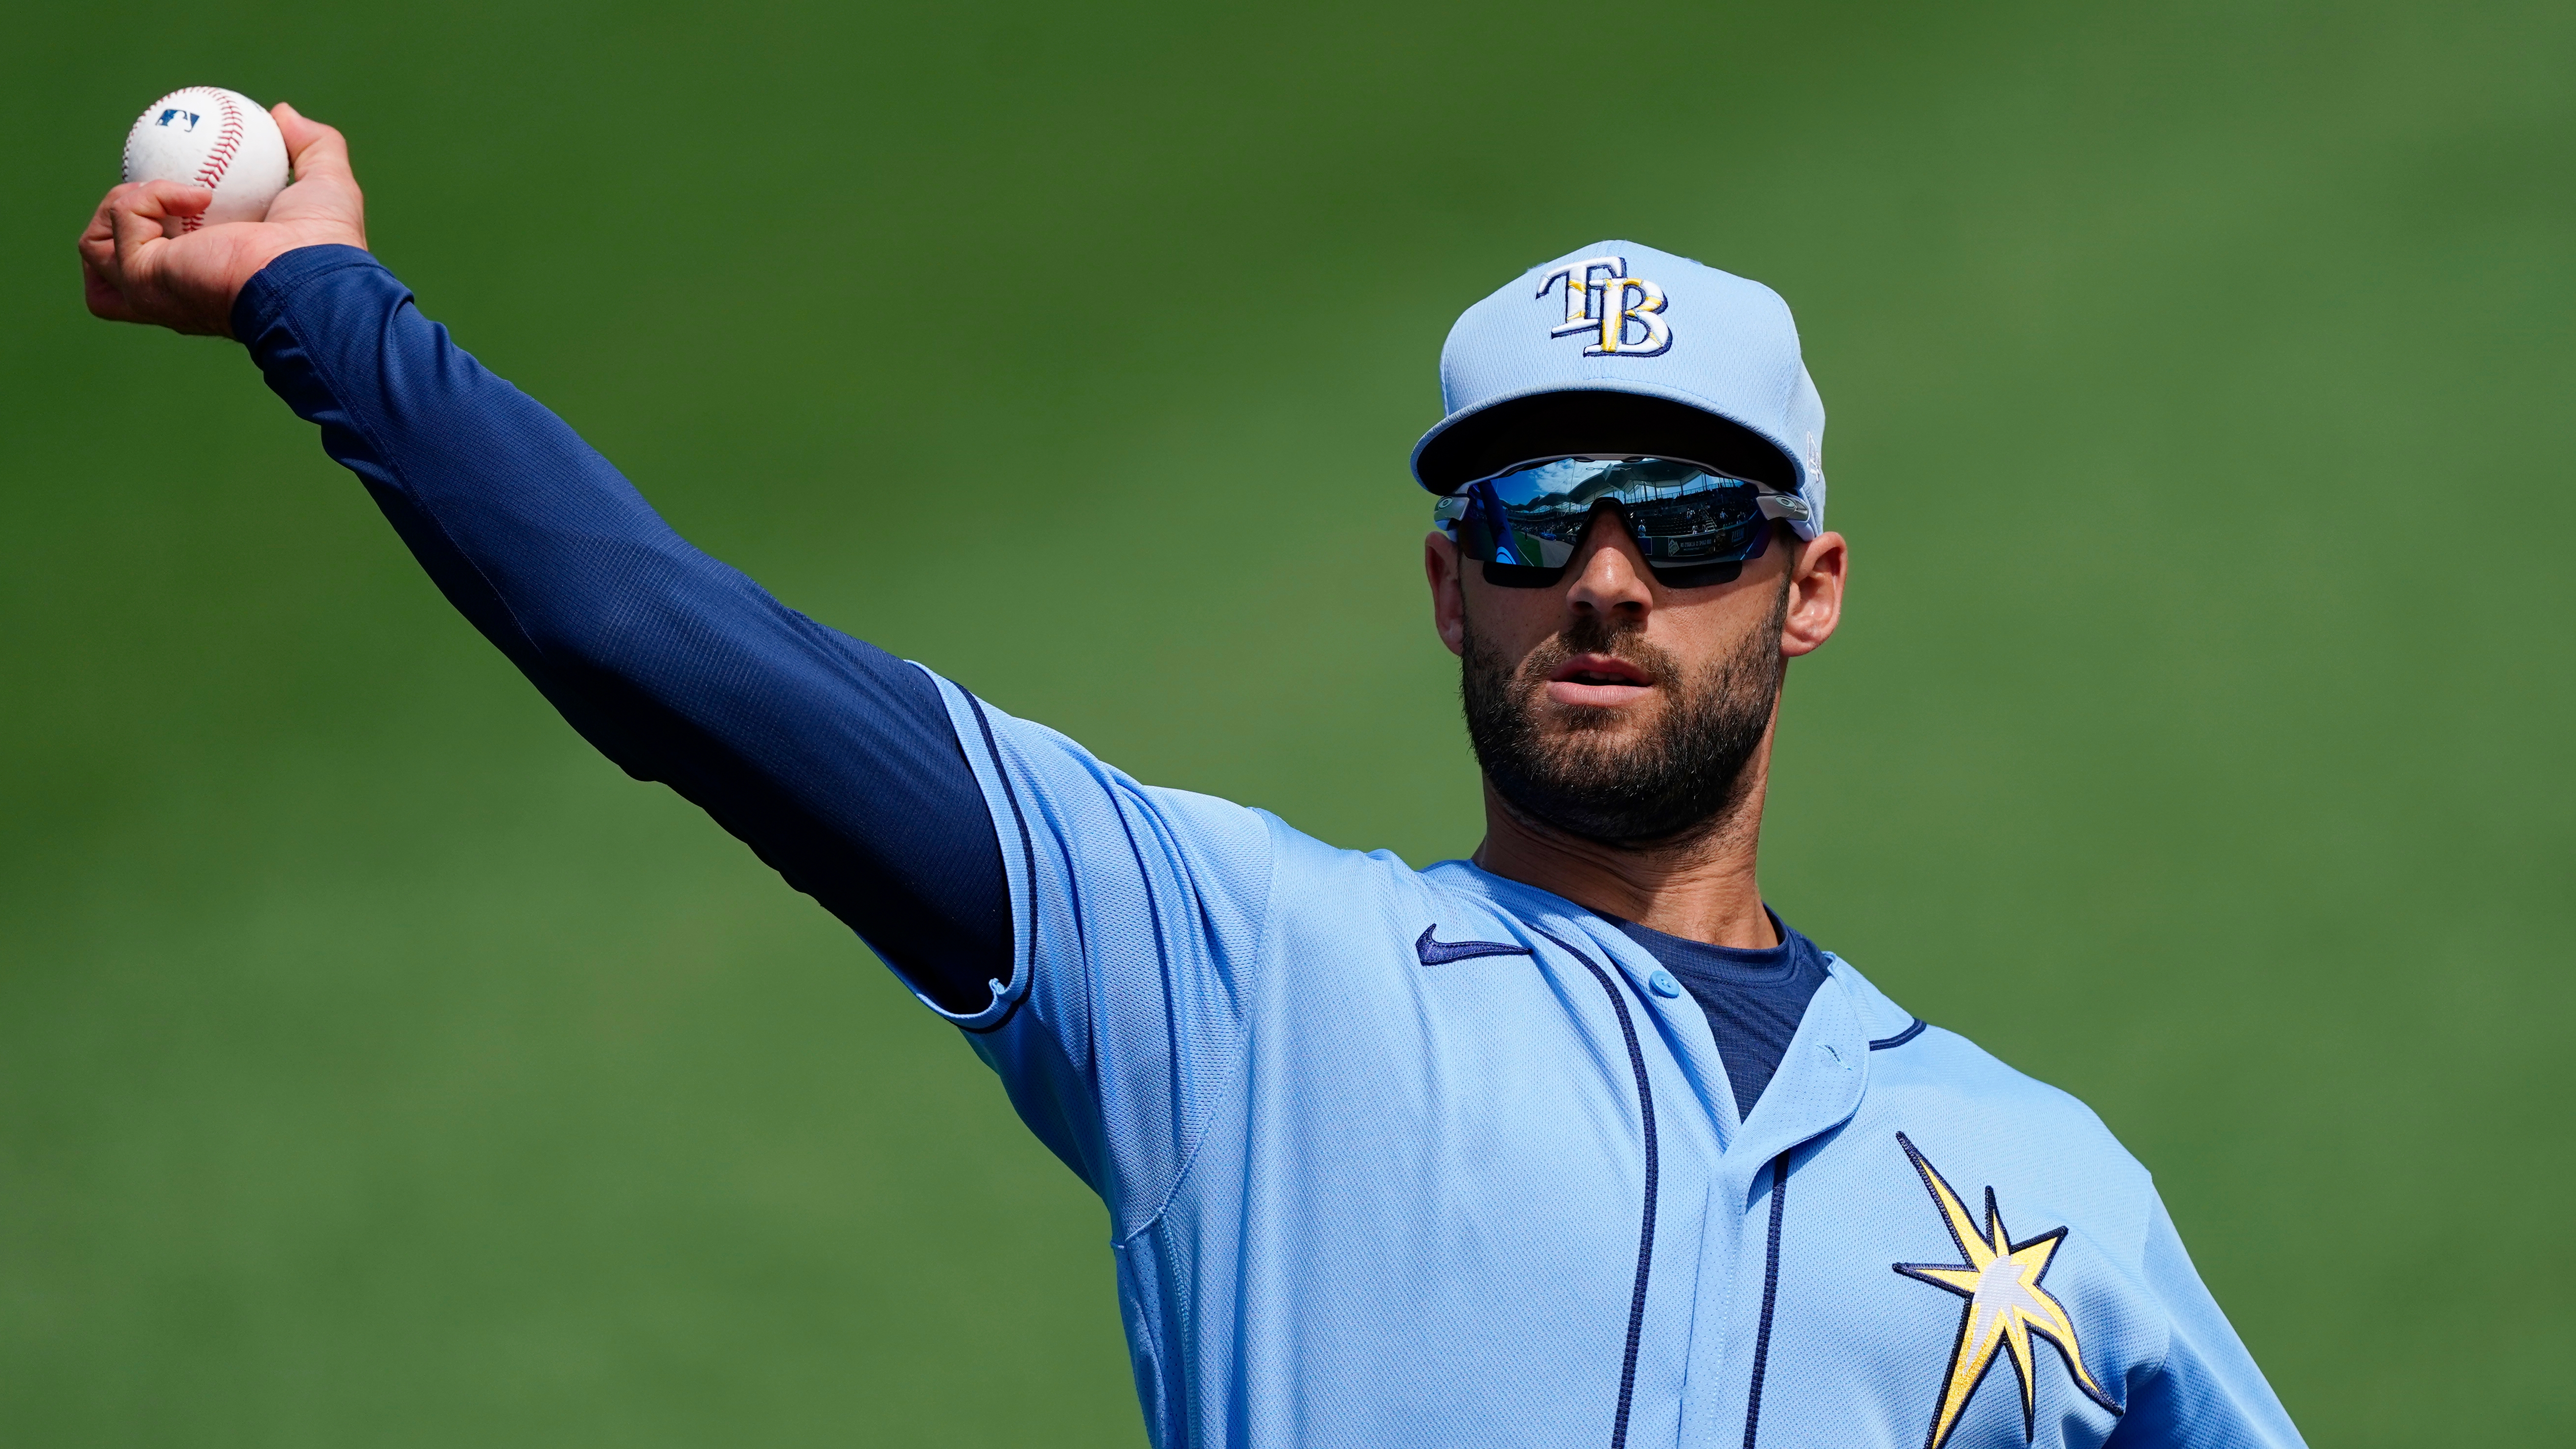 Rays place CF Kevin Kiermaier on COVID-19 related injured list